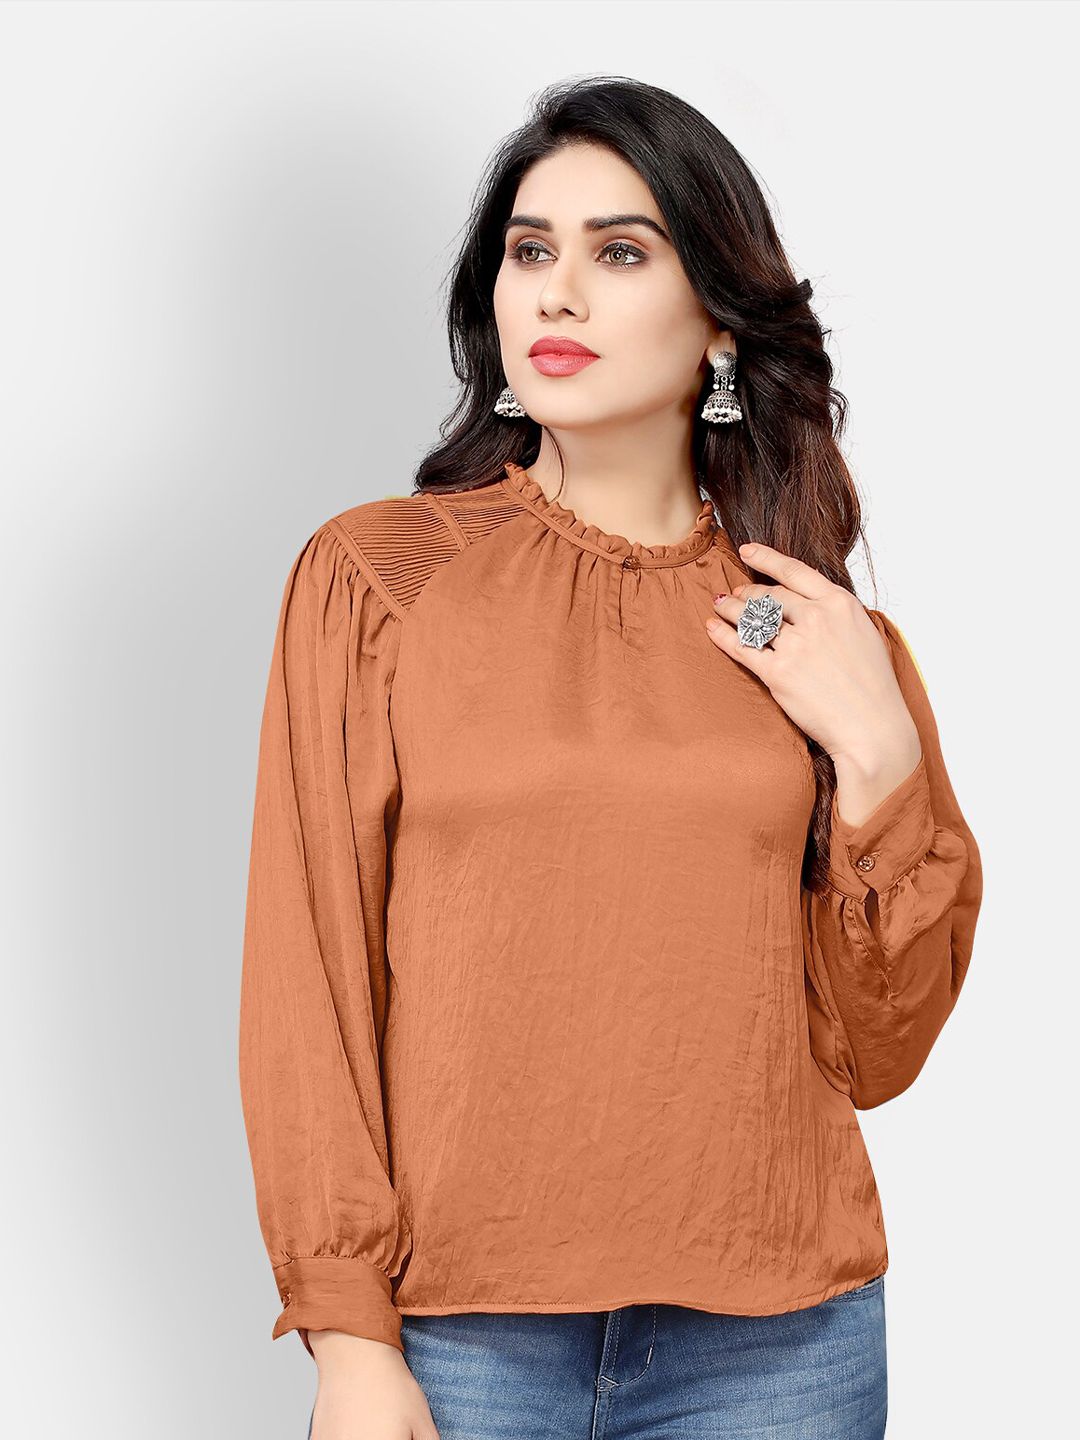 Mclothings Hummer Gathered Keyhole Neck Cuffed Sleeves Satin Top Price in India